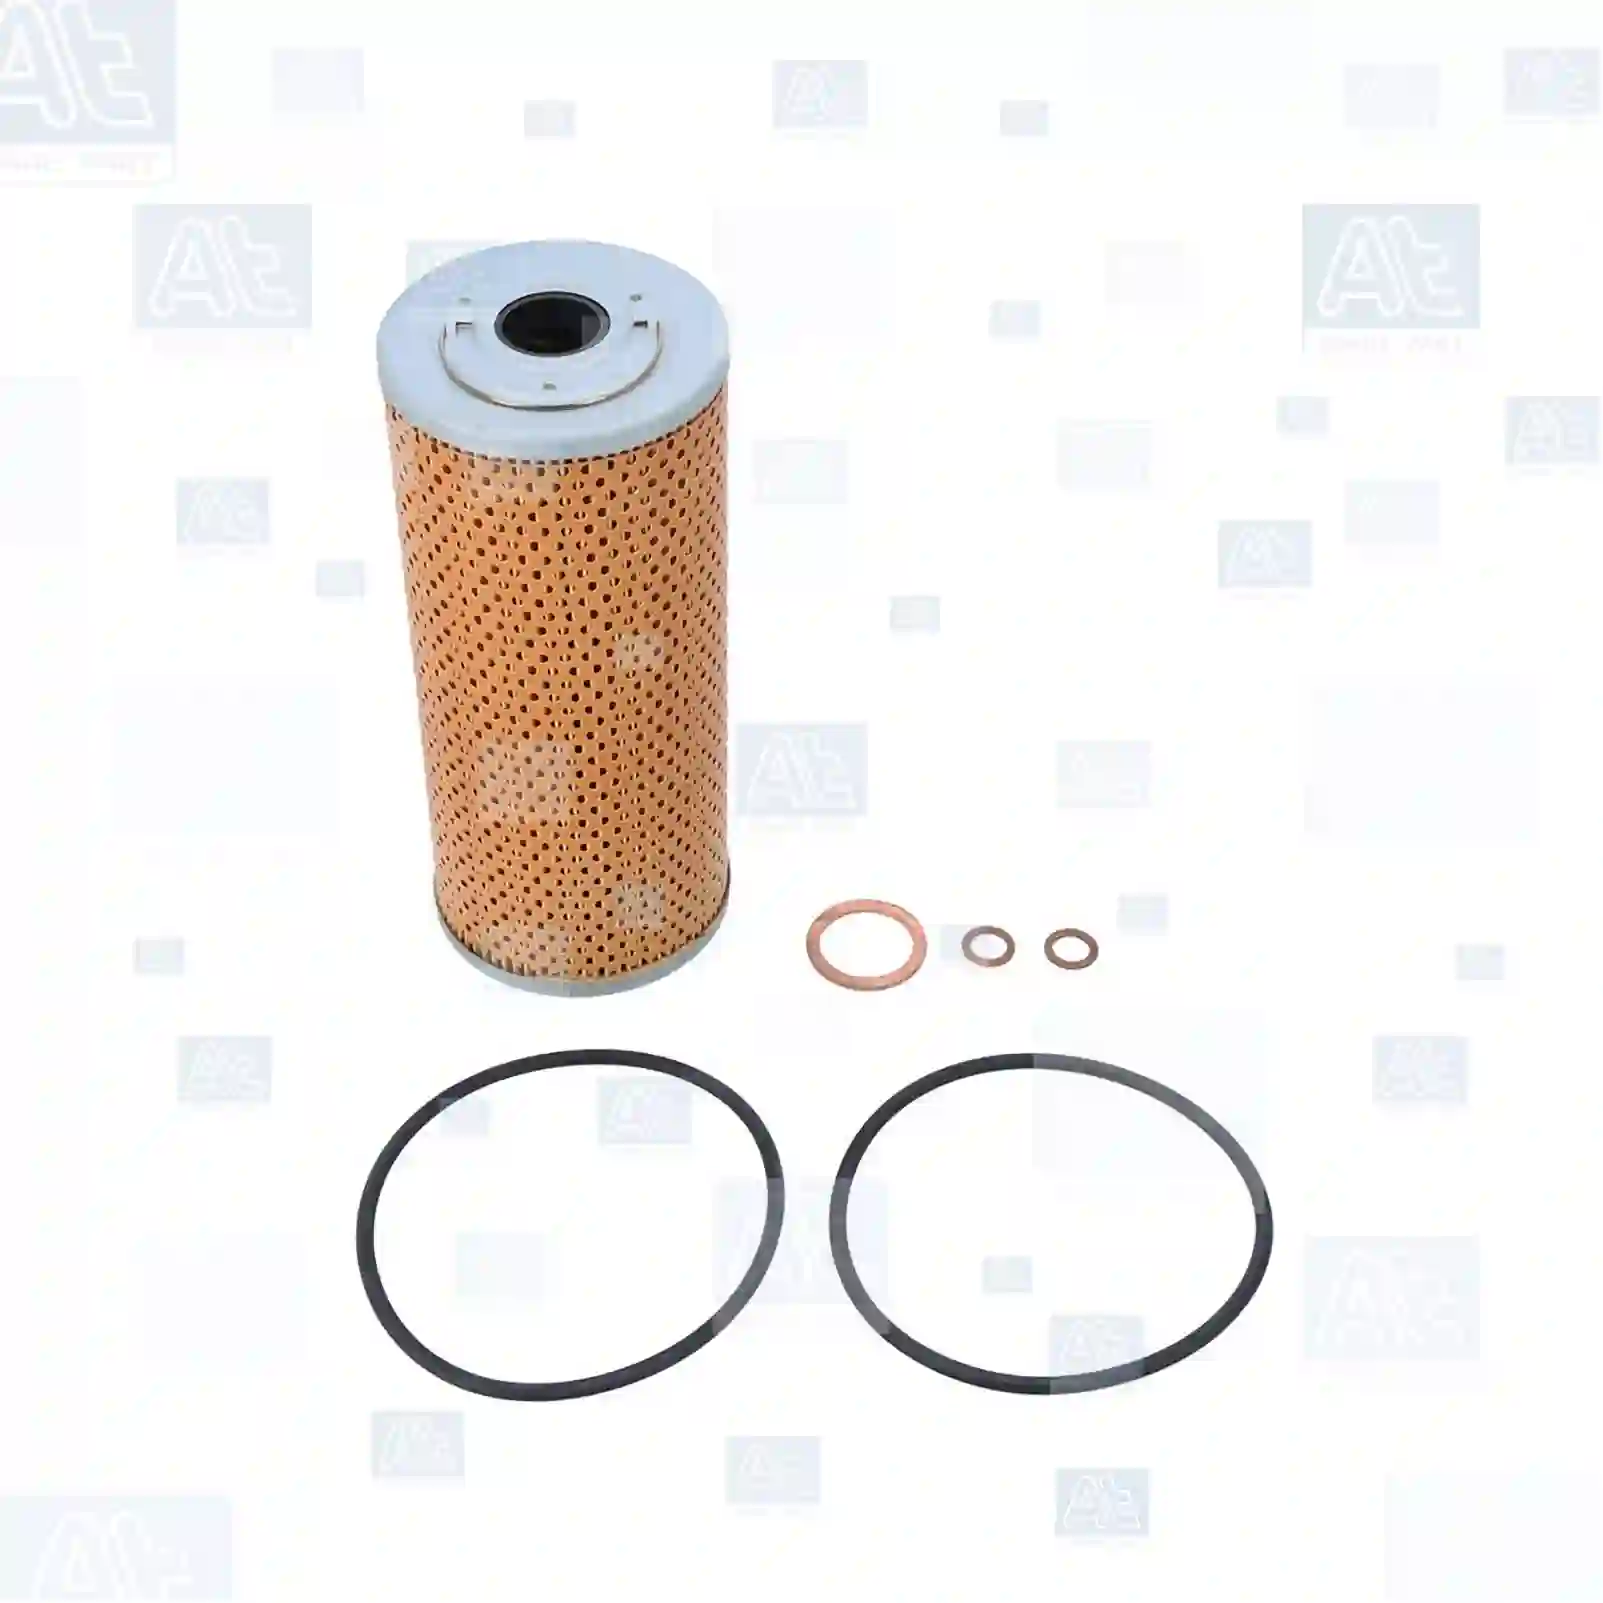 Oil filter insert, 77700088, 145217A1, 11844225, 11844325, 11845225, 11845525, 3521800109, 3661800310, 0001335300, 0001336330, 0001336331, 0001336332, 0007520230, 0007520231, 1500965, 323240, BBU7297, 13113774, 760017, 76001700, 5011473, 0009839007, 560282808, 7004125, 0001800809, 0011844225, 0011844325, 0011844725, 0011845225, 0011845525, 3521800109, 3660800009, 3661800009, 3661800309, 3661800310, 3661800809, 3661840125, 145217A1, 5001846628, LU125, 061232779, ZG01746-0008 ||  77700088 At Spare Part | Engine, Accelerator Pedal, Camshaft, Connecting Rod, Crankcase, Crankshaft, Cylinder Head, Engine Suspension Mountings, Exhaust Manifold, Exhaust Gas Recirculation, Filter Kits, Flywheel Housing, General Overhaul Kits, Engine, Intake Manifold, Oil Cleaner, Oil Cooler, Oil Filter, Oil Pump, Oil Sump, Piston & Liner, Sensor & Switch, Timing Case, Turbocharger, Cooling System, Belt Tensioner, Coolant Filter, Coolant Pipe, Corrosion Prevention Agent, Drive, Expansion Tank, Fan, Intercooler, Monitors & Gauges, Radiator, Thermostat, V-Belt / Timing belt, Water Pump, Fuel System, Electronical Injector Unit, Feed Pump, Fuel Filter, cpl., Fuel Gauge Sender,  Fuel Line, Fuel Pump, Fuel Tank, Injection Line Kit, Injection Pump, Exhaust System, Clutch & Pedal, Gearbox, Propeller Shaft, Axles, Brake System, Hubs & Wheels, Suspension, Leaf Spring, Universal Parts / Accessories, Steering, Electrical System, Cabin Oil filter insert, 77700088, 145217A1, 11844225, 11844325, 11845225, 11845525, 3521800109, 3661800310, 0001335300, 0001336330, 0001336331, 0001336332, 0007520230, 0007520231, 1500965, 323240, BBU7297, 13113774, 760017, 76001700, 5011473, 0009839007, 560282808, 7004125, 0001800809, 0011844225, 0011844325, 0011844725, 0011845225, 0011845525, 3521800109, 3660800009, 3661800009, 3661800309, 3661800310, 3661800809, 3661840125, 145217A1, 5001846628, LU125, 061232779, ZG01746-0008 ||  77700088 At Spare Part | Engine, Accelerator Pedal, Camshaft, Connecting Rod, Crankcase, Crankshaft, Cylinder Head, Engine Suspension Mountings, Exhaust Manifold, Exhaust Gas Recirculation, Filter Kits, Flywheel Housing, General Overhaul Kits, Engine, Intake Manifold, Oil Cleaner, Oil Cooler, Oil Filter, Oil Pump, Oil Sump, Piston & Liner, Sensor & Switch, Timing Case, Turbocharger, Cooling System, Belt Tensioner, Coolant Filter, Coolant Pipe, Corrosion Prevention Agent, Drive, Expansion Tank, Fan, Intercooler, Monitors & Gauges, Radiator, Thermostat, V-Belt / Timing belt, Water Pump, Fuel System, Electronical Injector Unit, Feed Pump, Fuel Filter, cpl., Fuel Gauge Sender,  Fuel Line, Fuel Pump, Fuel Tank, Injection Line Kit, Injection Pump, Exhaust System, Clutch & Pedal, Gearbox, Propeller Shaft, Axles, Brake System, Hubs & Wheels, Suspension, Leaf Spring, Universal Parts / Accessories, Steering, Electrical System, Cabin